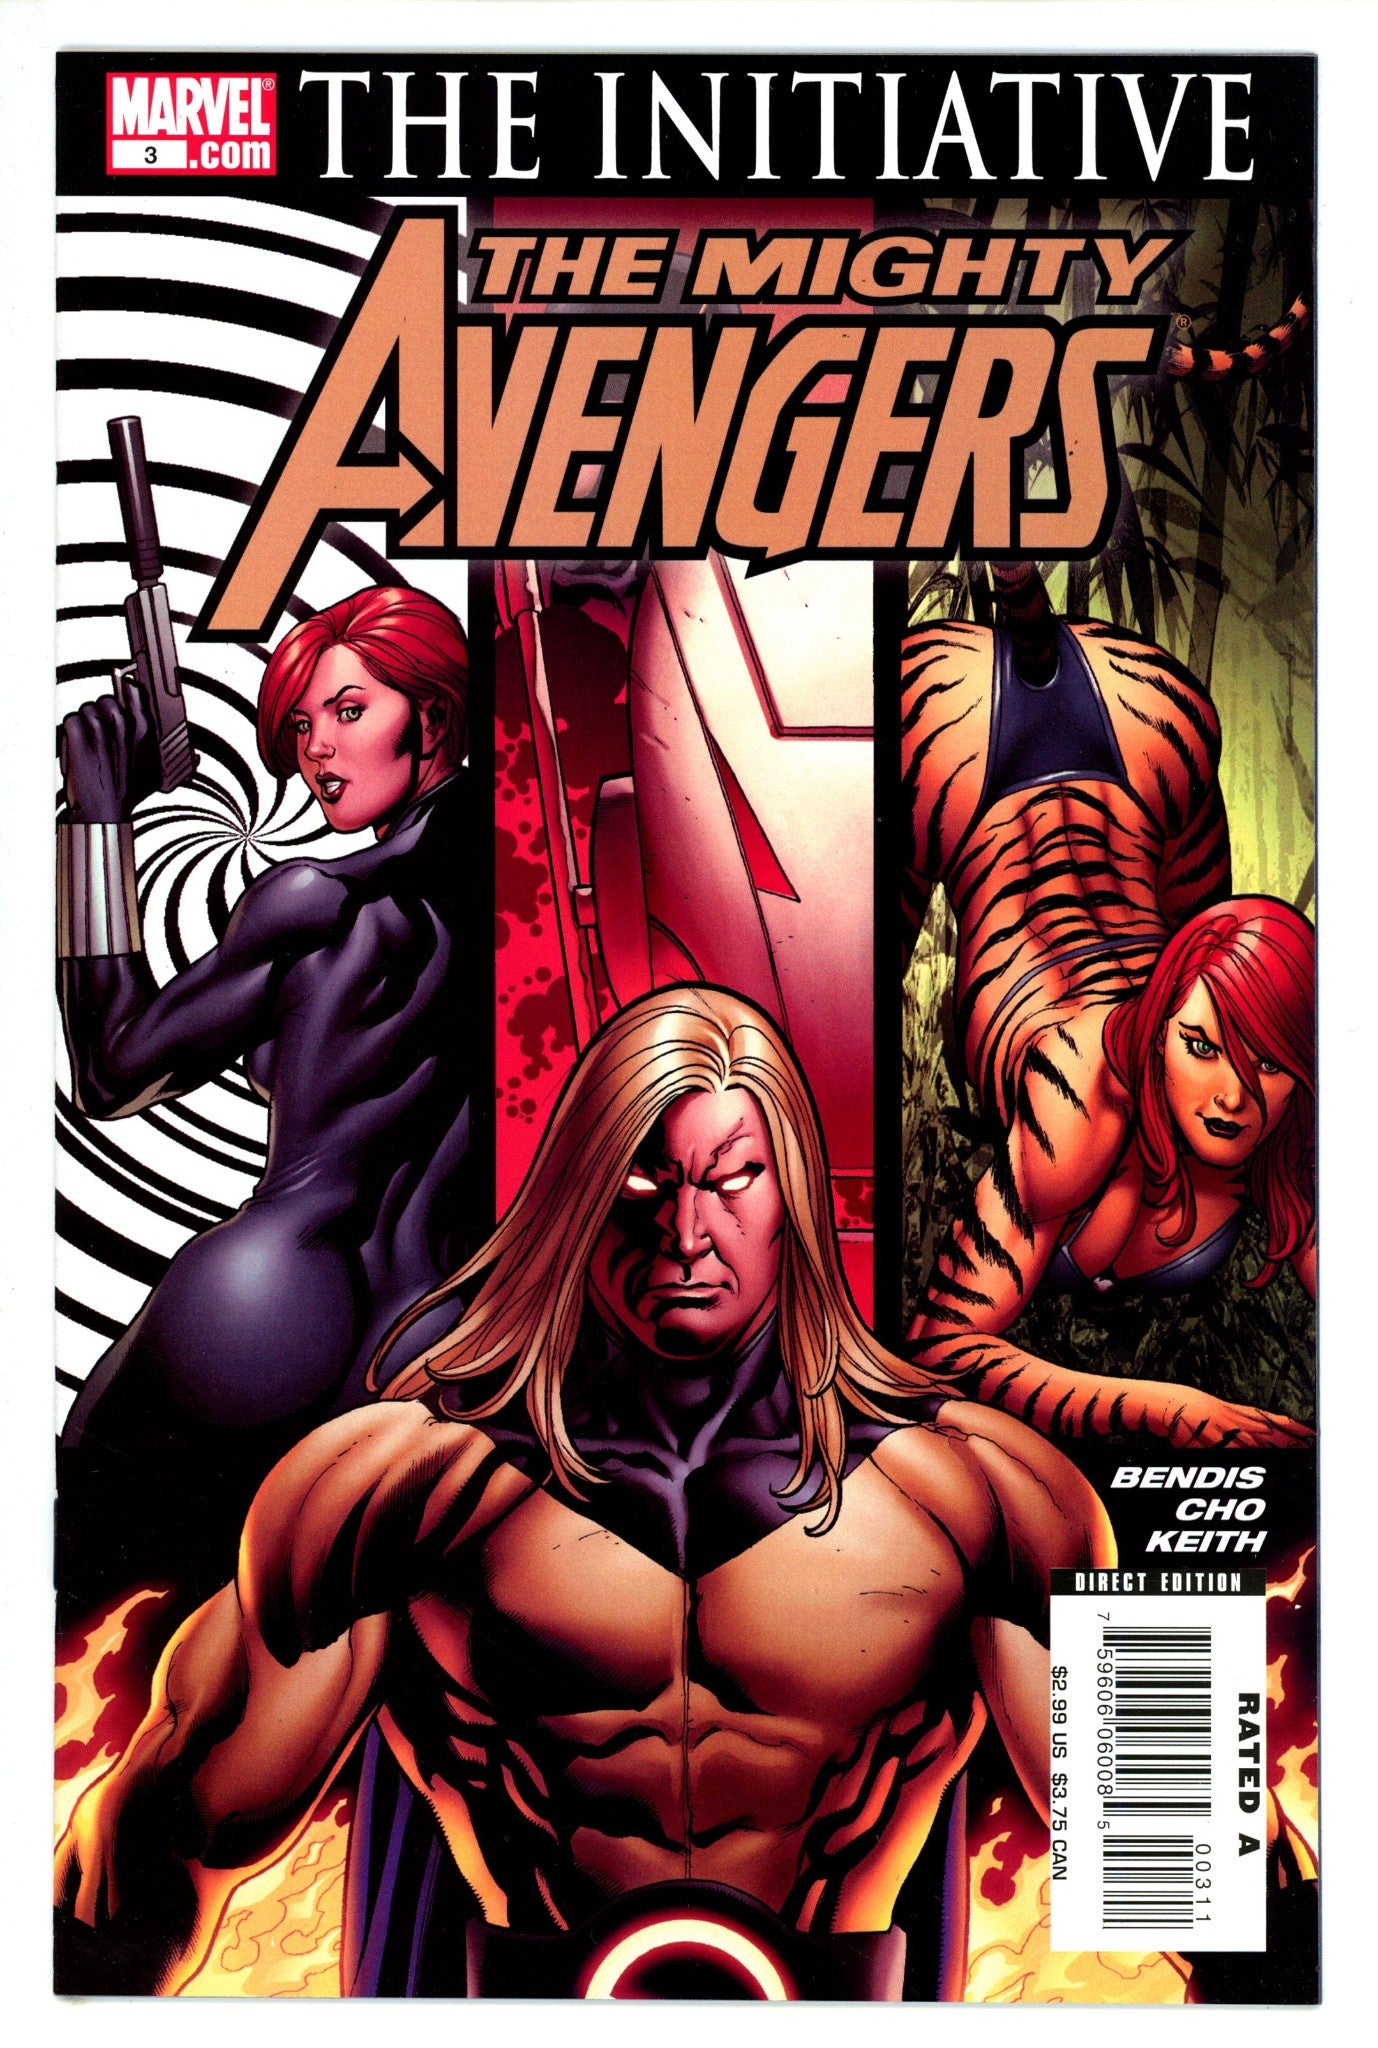 The Mighty Avengers Vol 1 3 High Grade (2007)